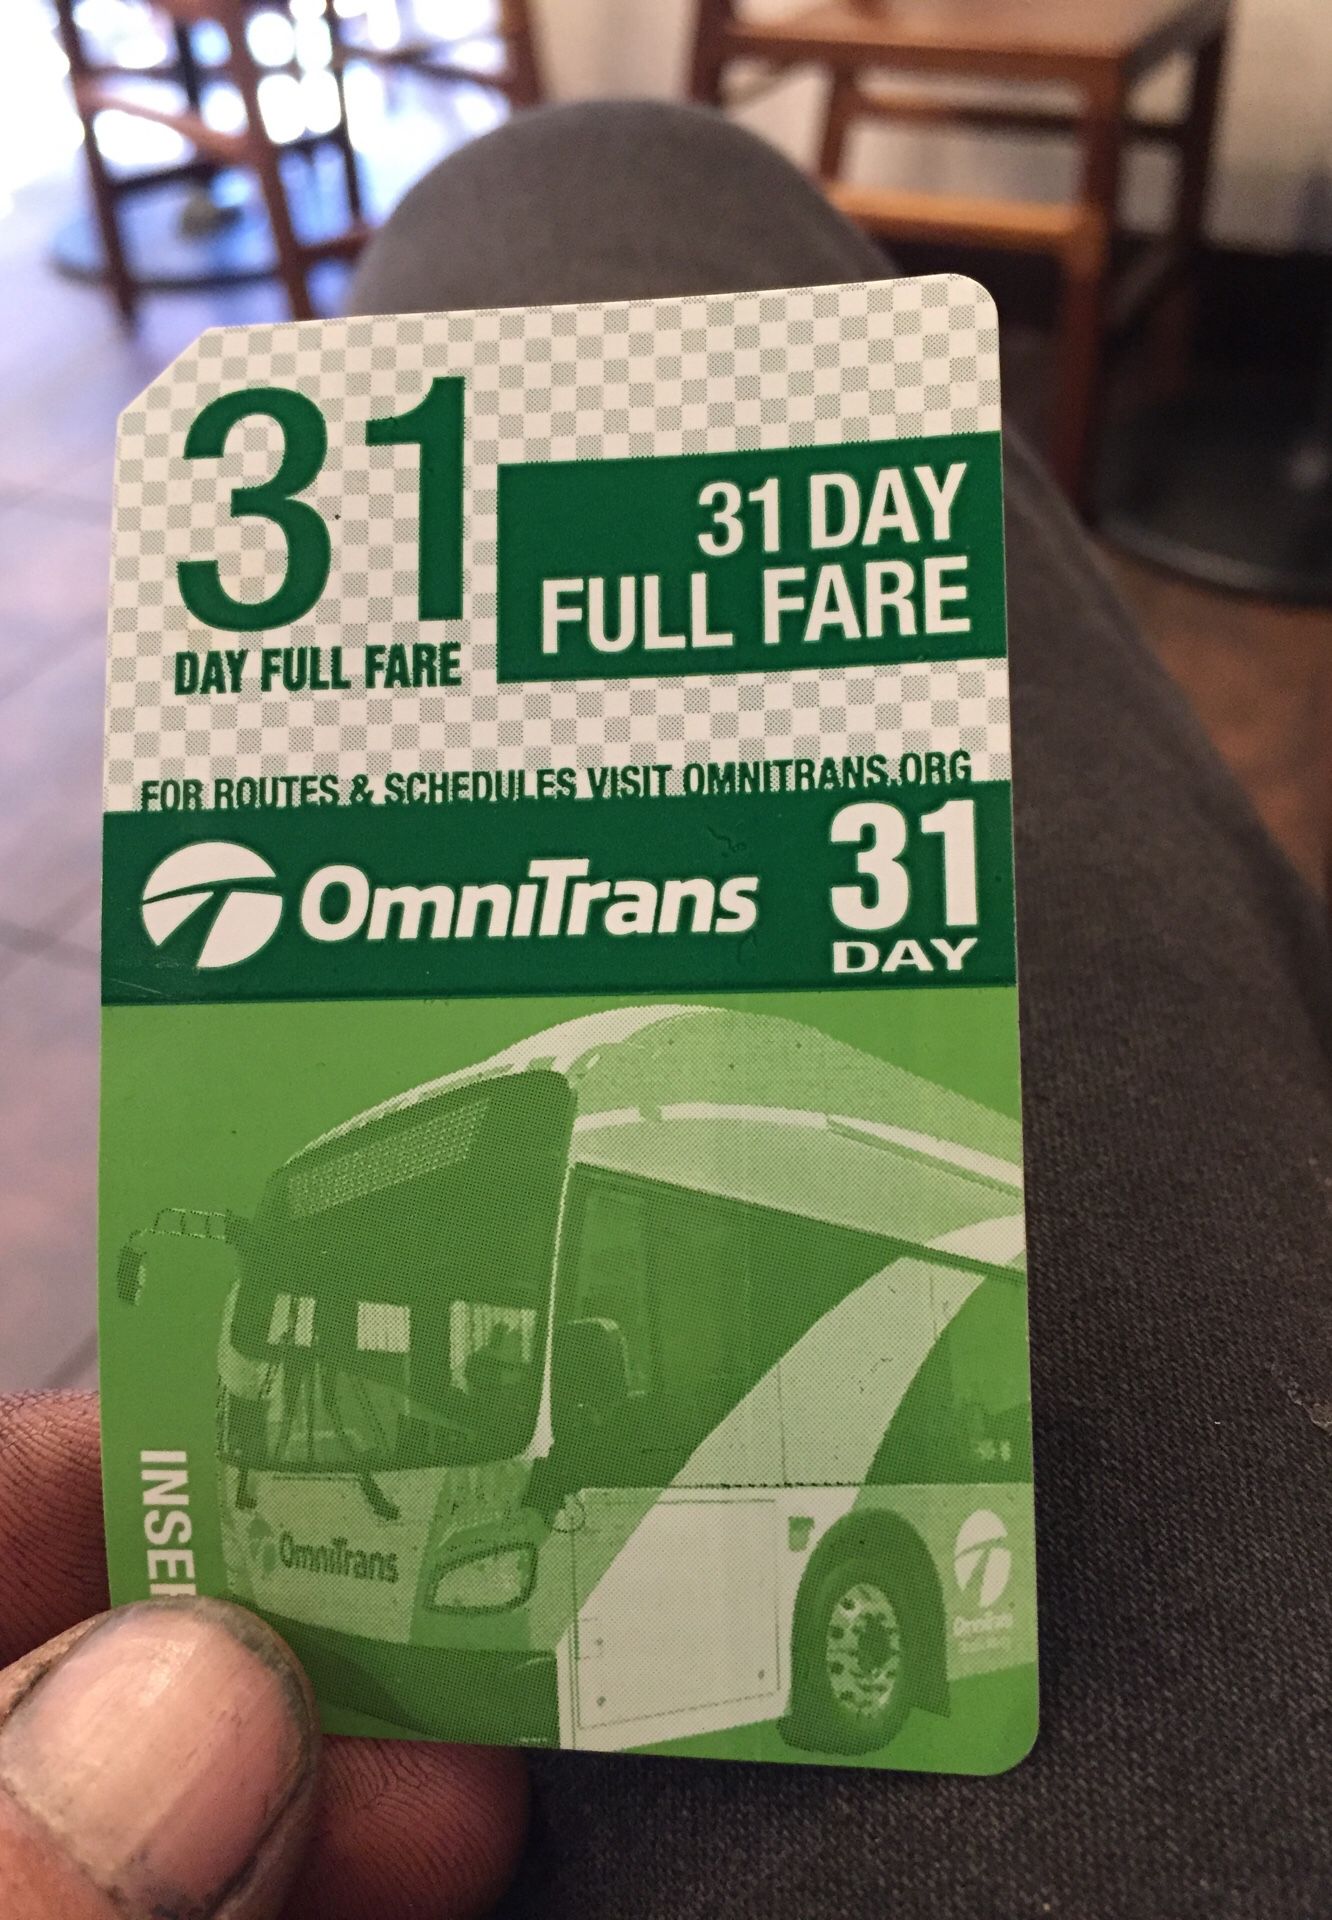 31 day bus pass I’m at haven and foothill